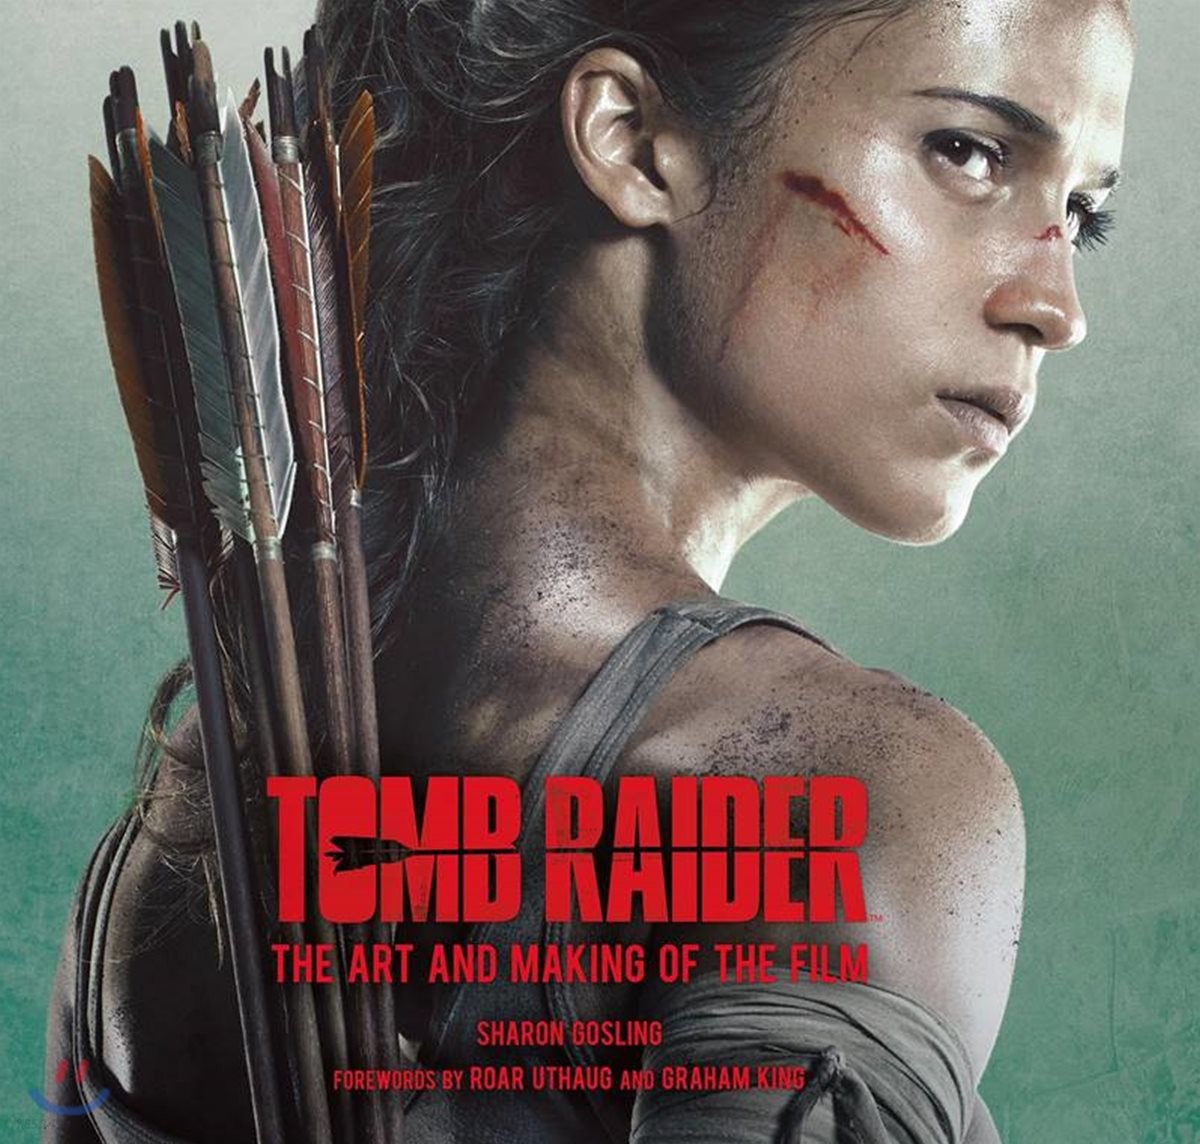 Tomb Raider: The Art and Making of the Film (툼 레이더 메이킹 북)